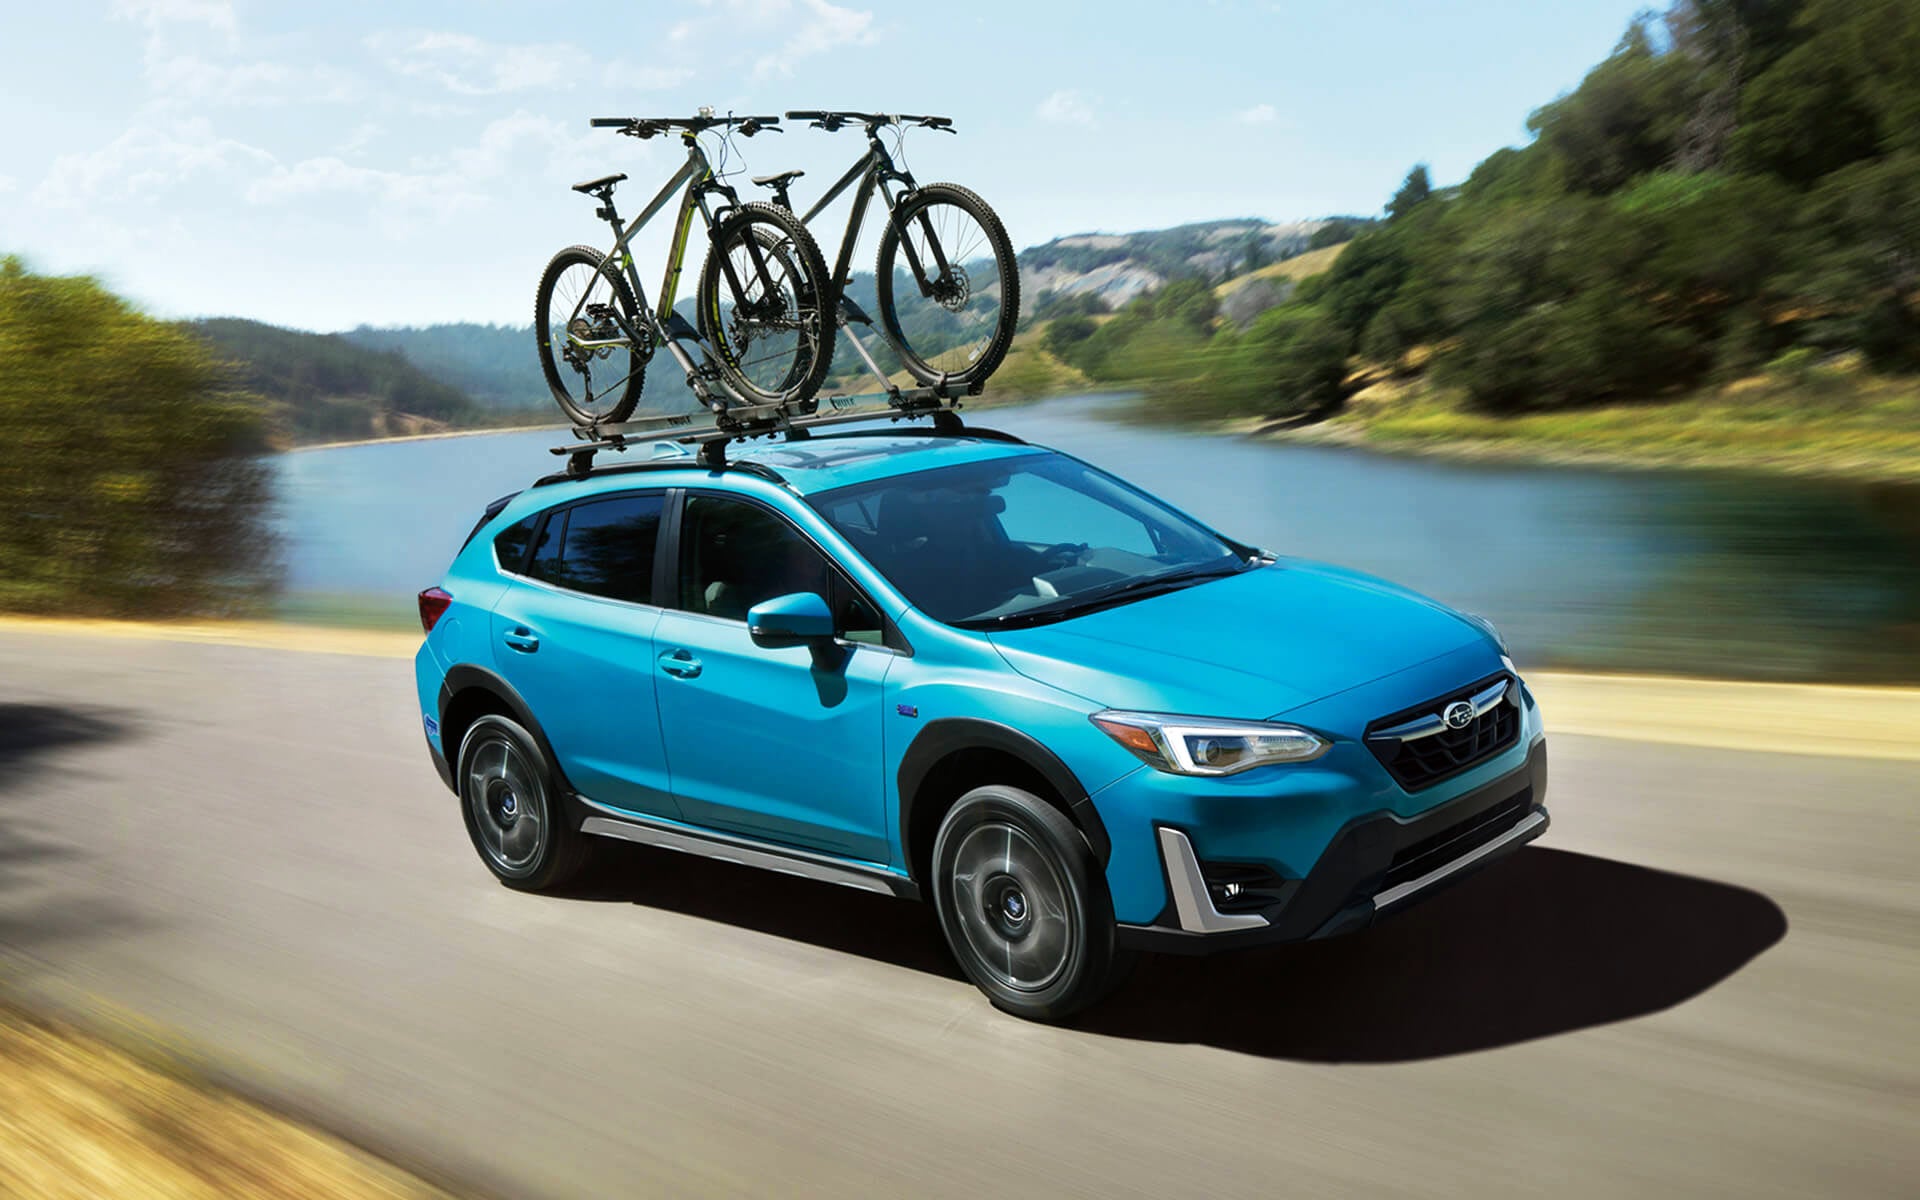 A blue Crosstrek Hybrid with two bicycles on its roof rack driving beside a river | Subaru World of Newton in Newton NJ